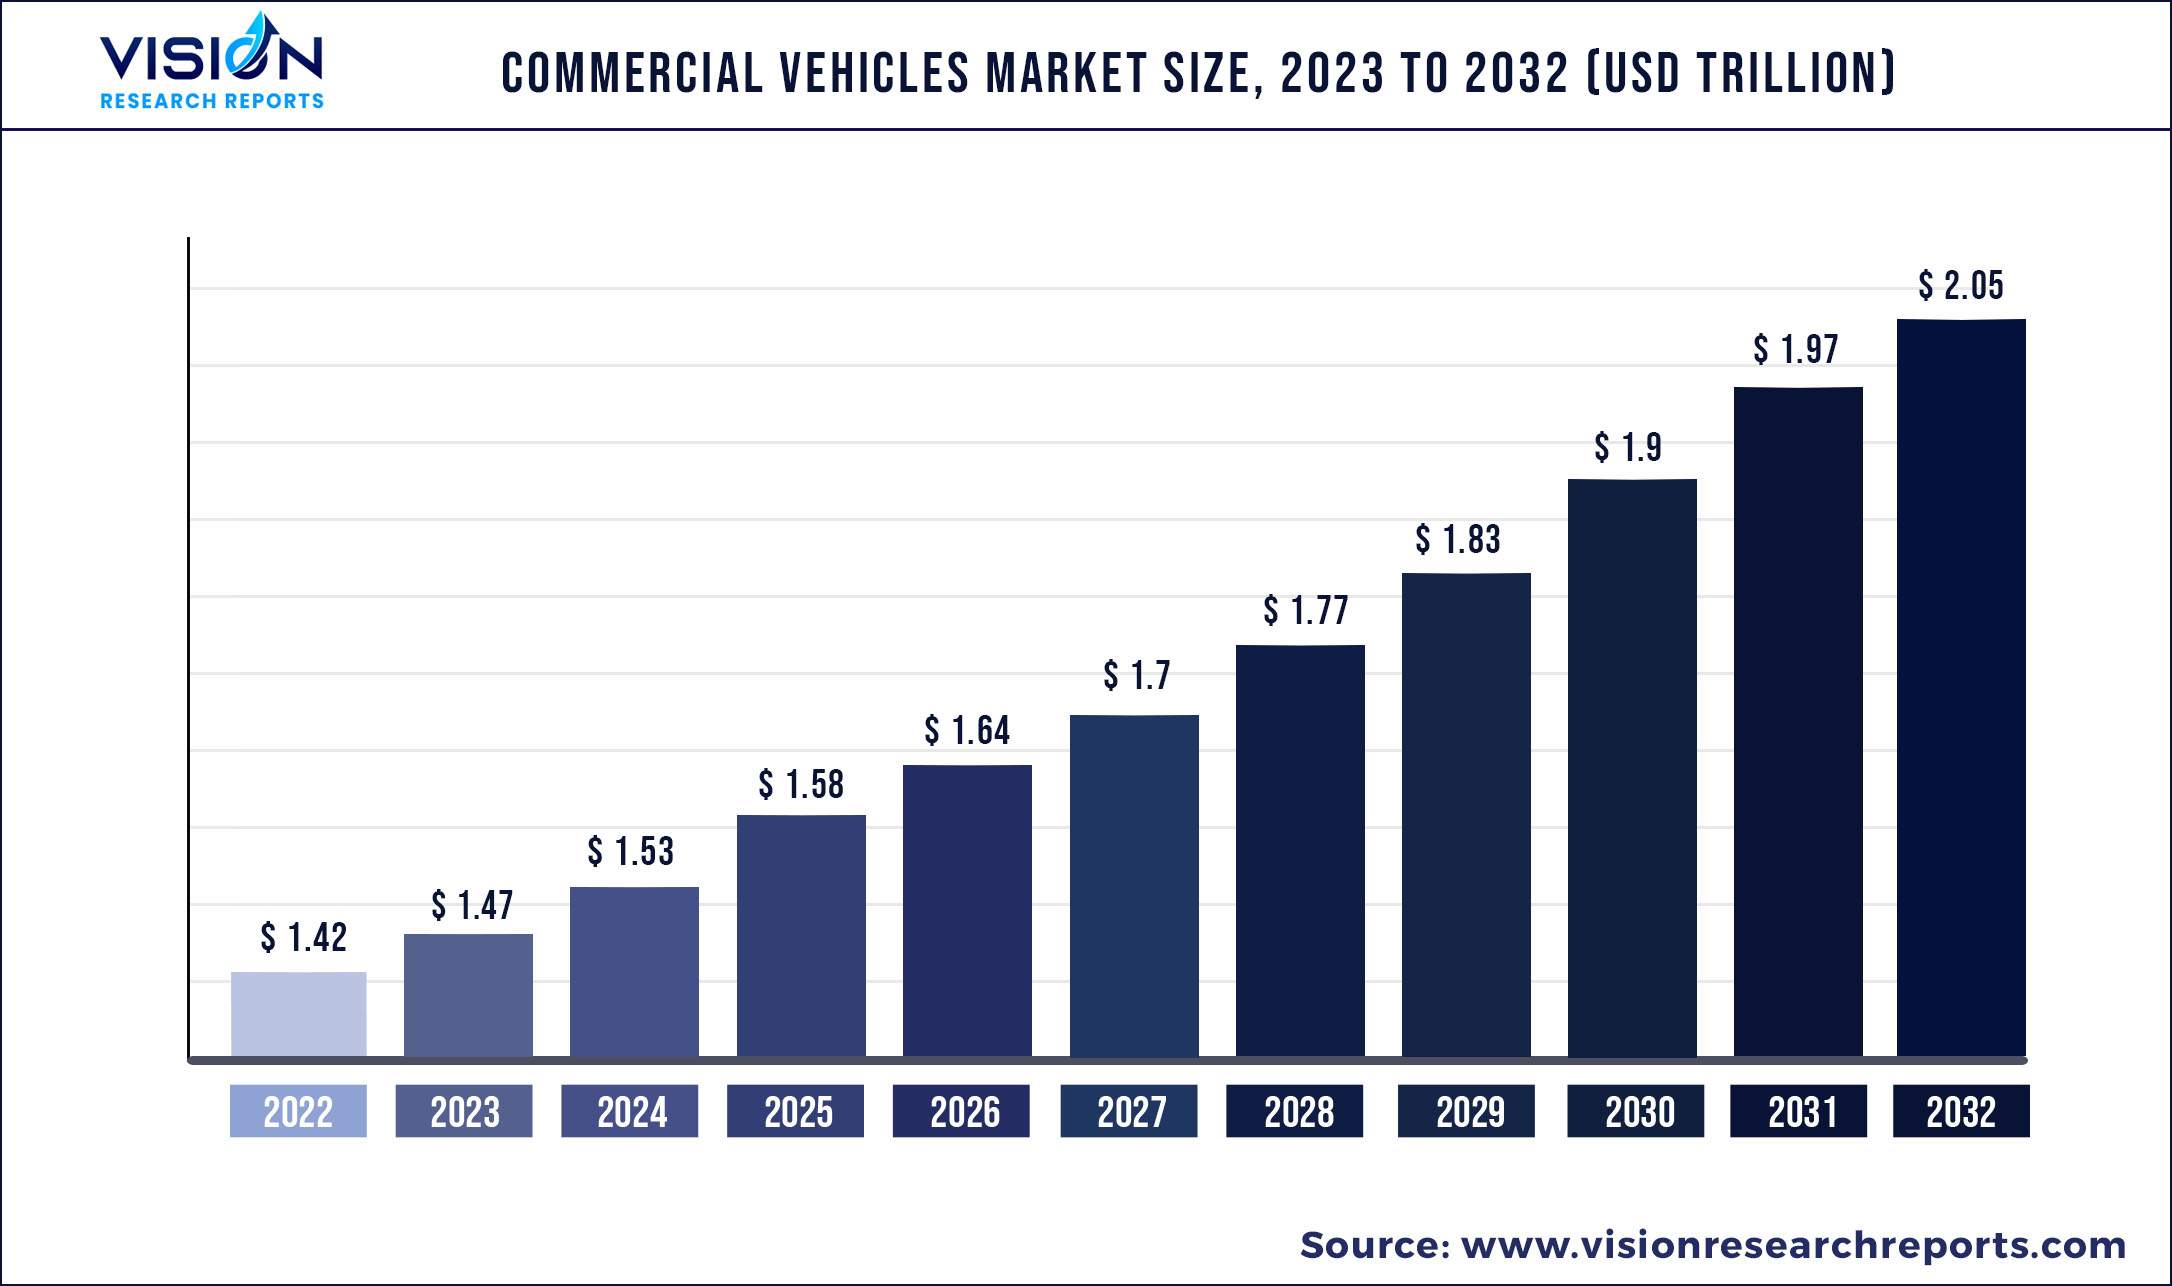 Commercial Vehicles Market Size 2023 to 2032